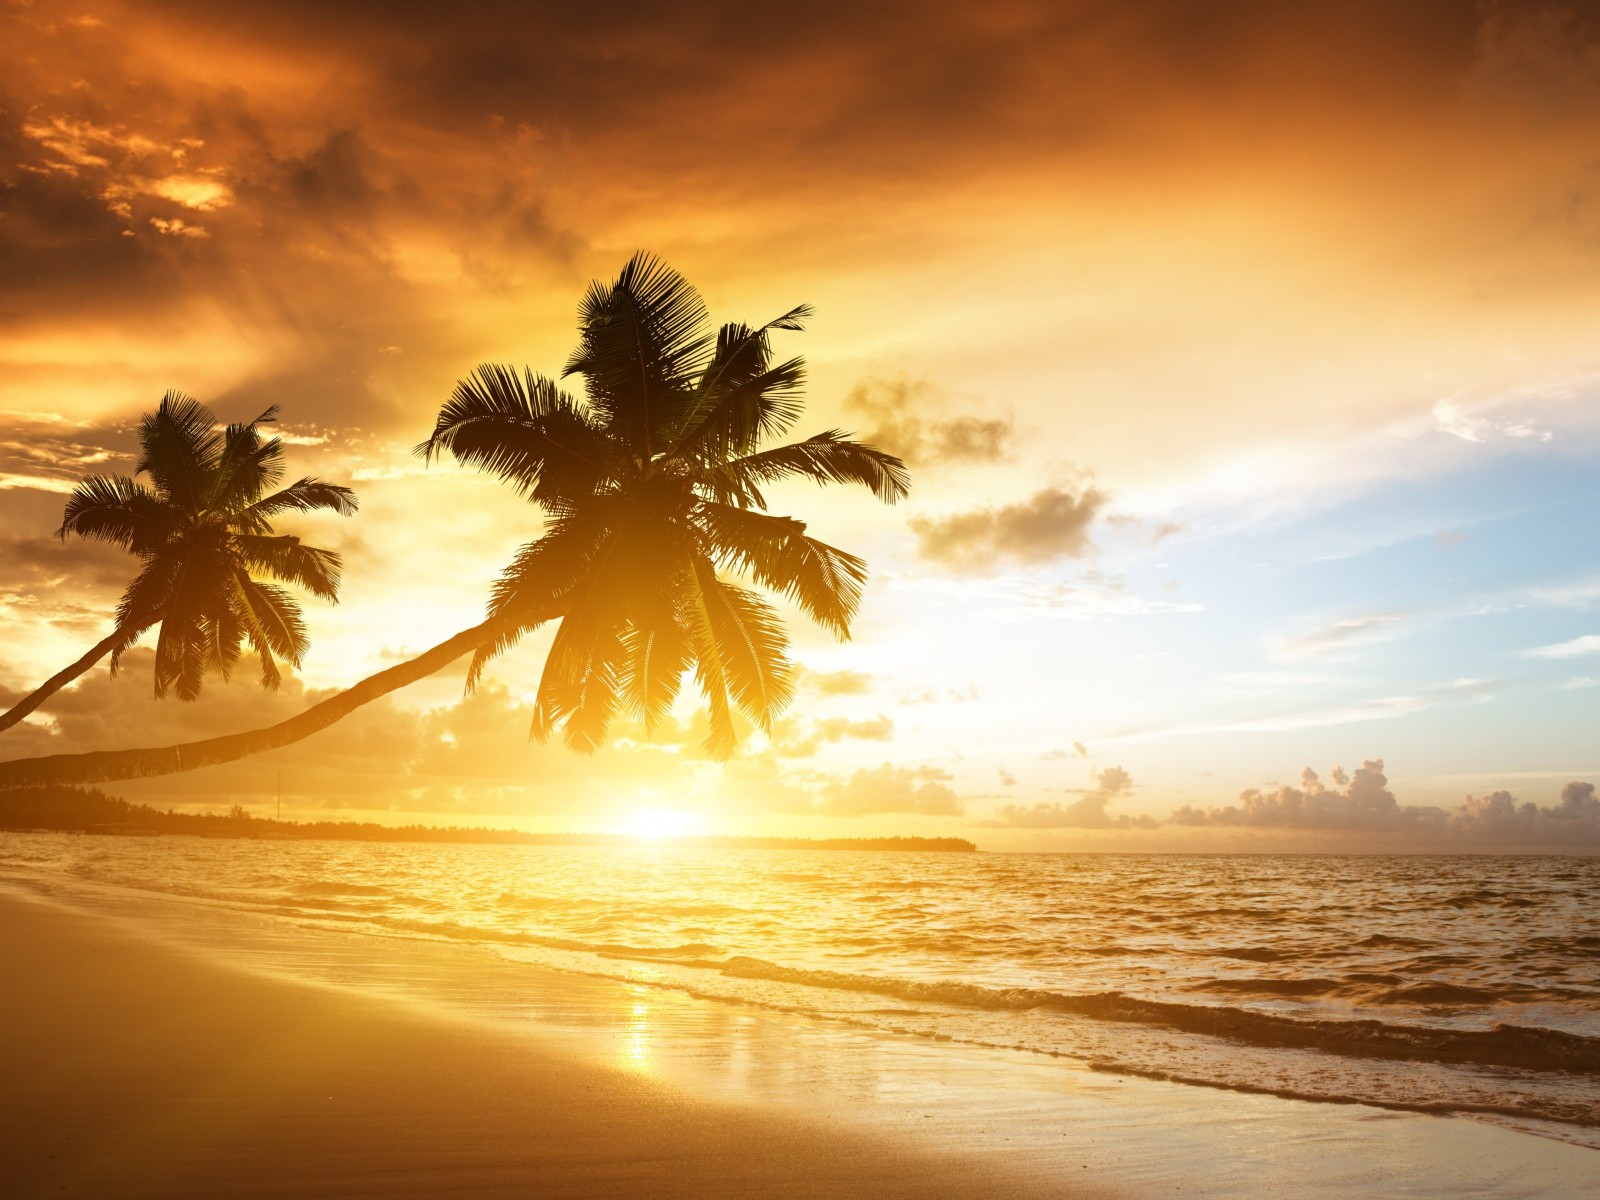 Beach With Palm Trees At Sunset Wallpaper for Desktop 1600x1200